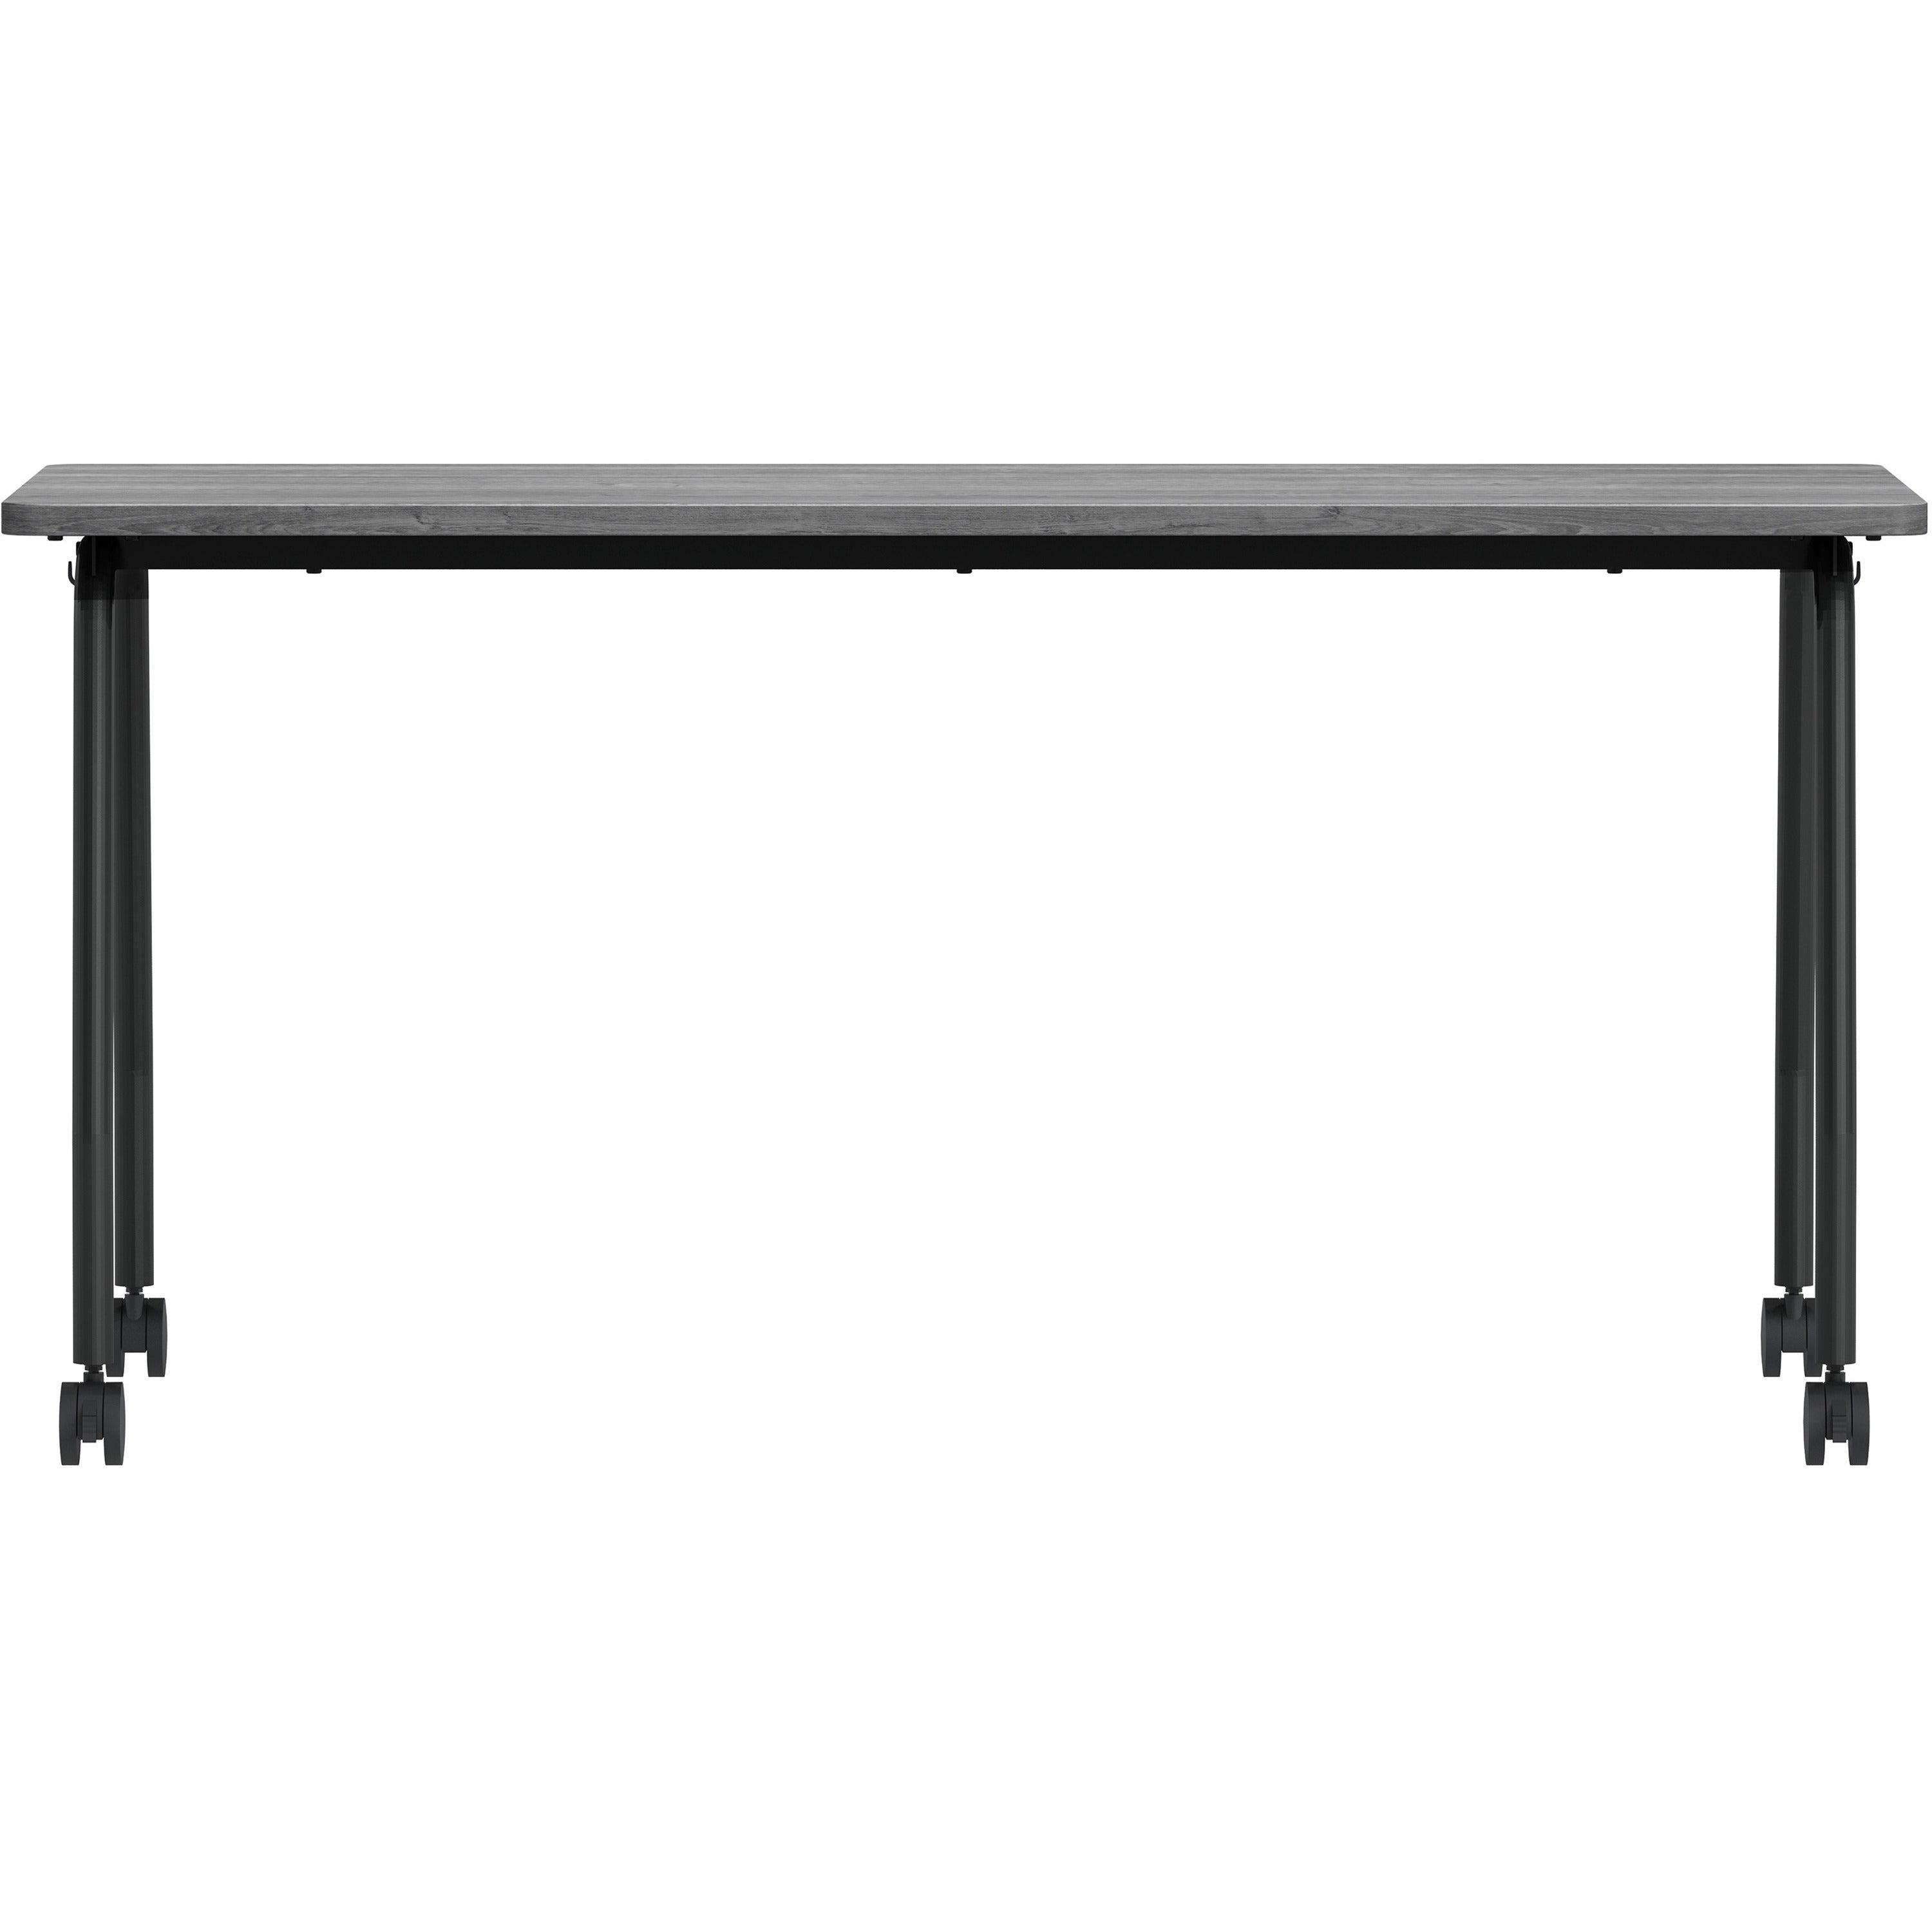 lorell-training-table-for-table-toplaminated-top-300-lb-capacity-2950-table-top-length-x-2363-table-top-width-x-1-table-top-thickness-59-height-assembly-required-weathered-charcoal-particleboard-top-material-1-each_llr60846 - 3